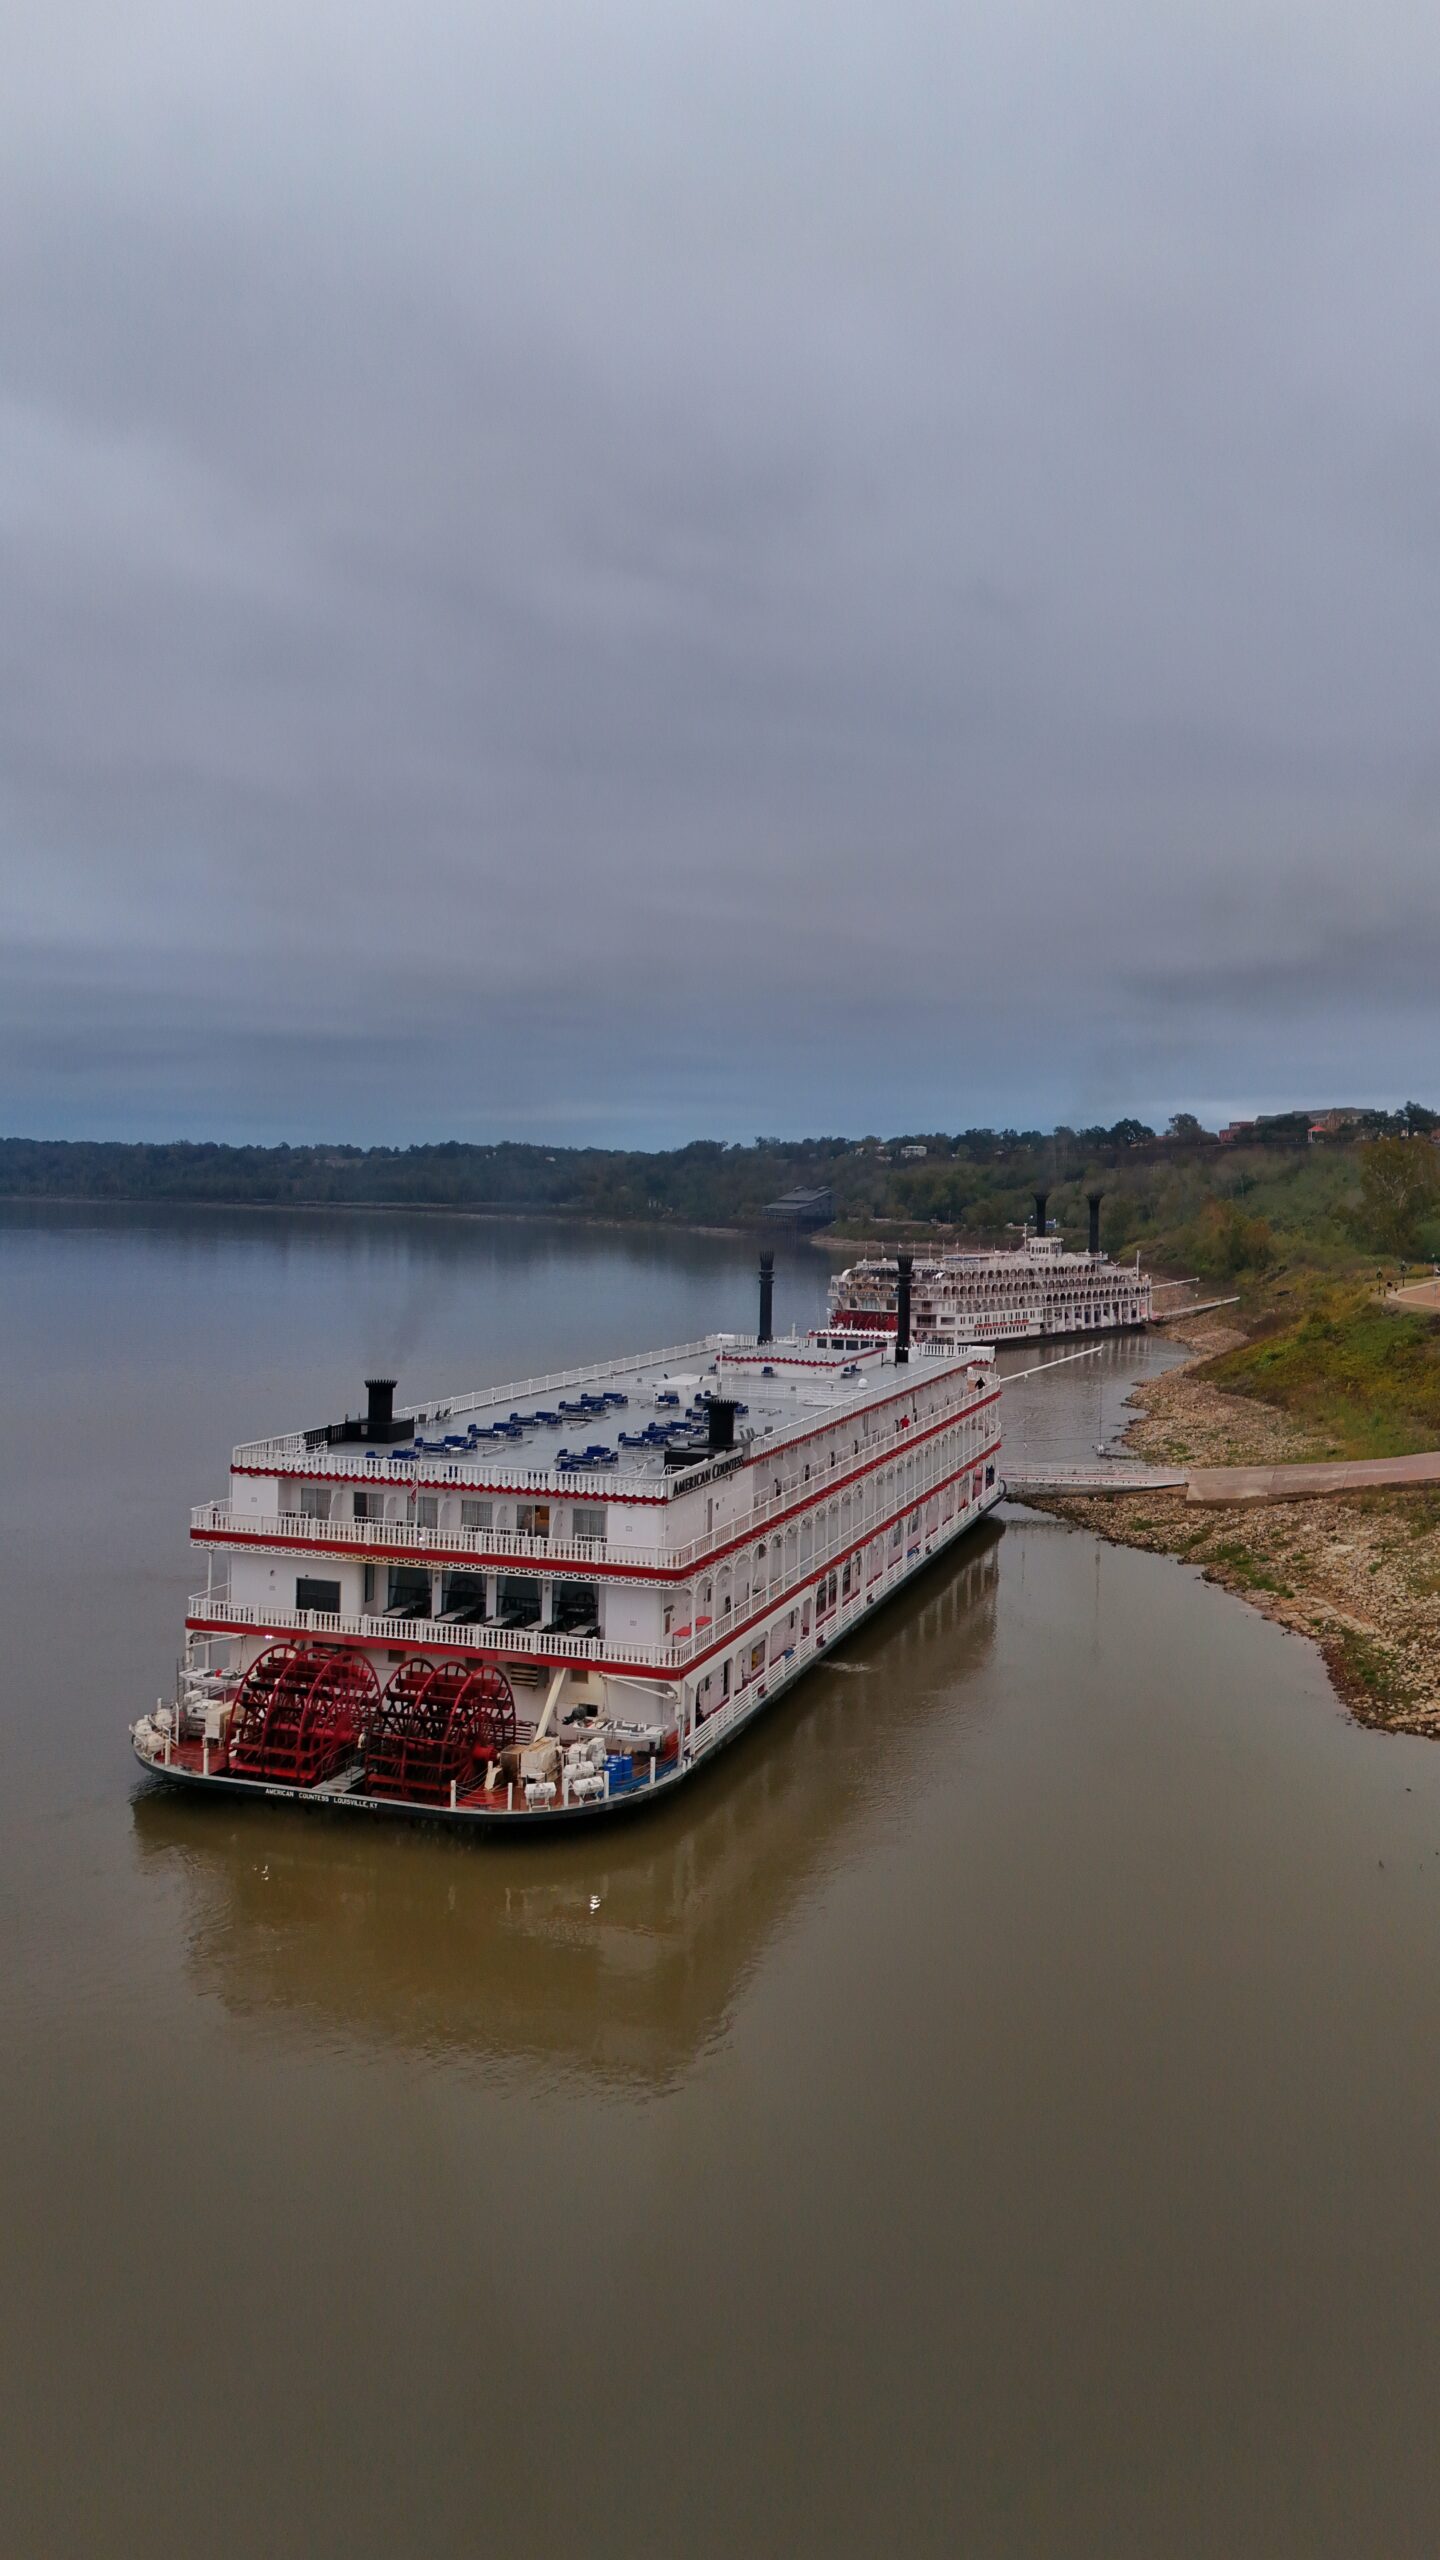 American Queen Paddlewheeler on the Mississippi River